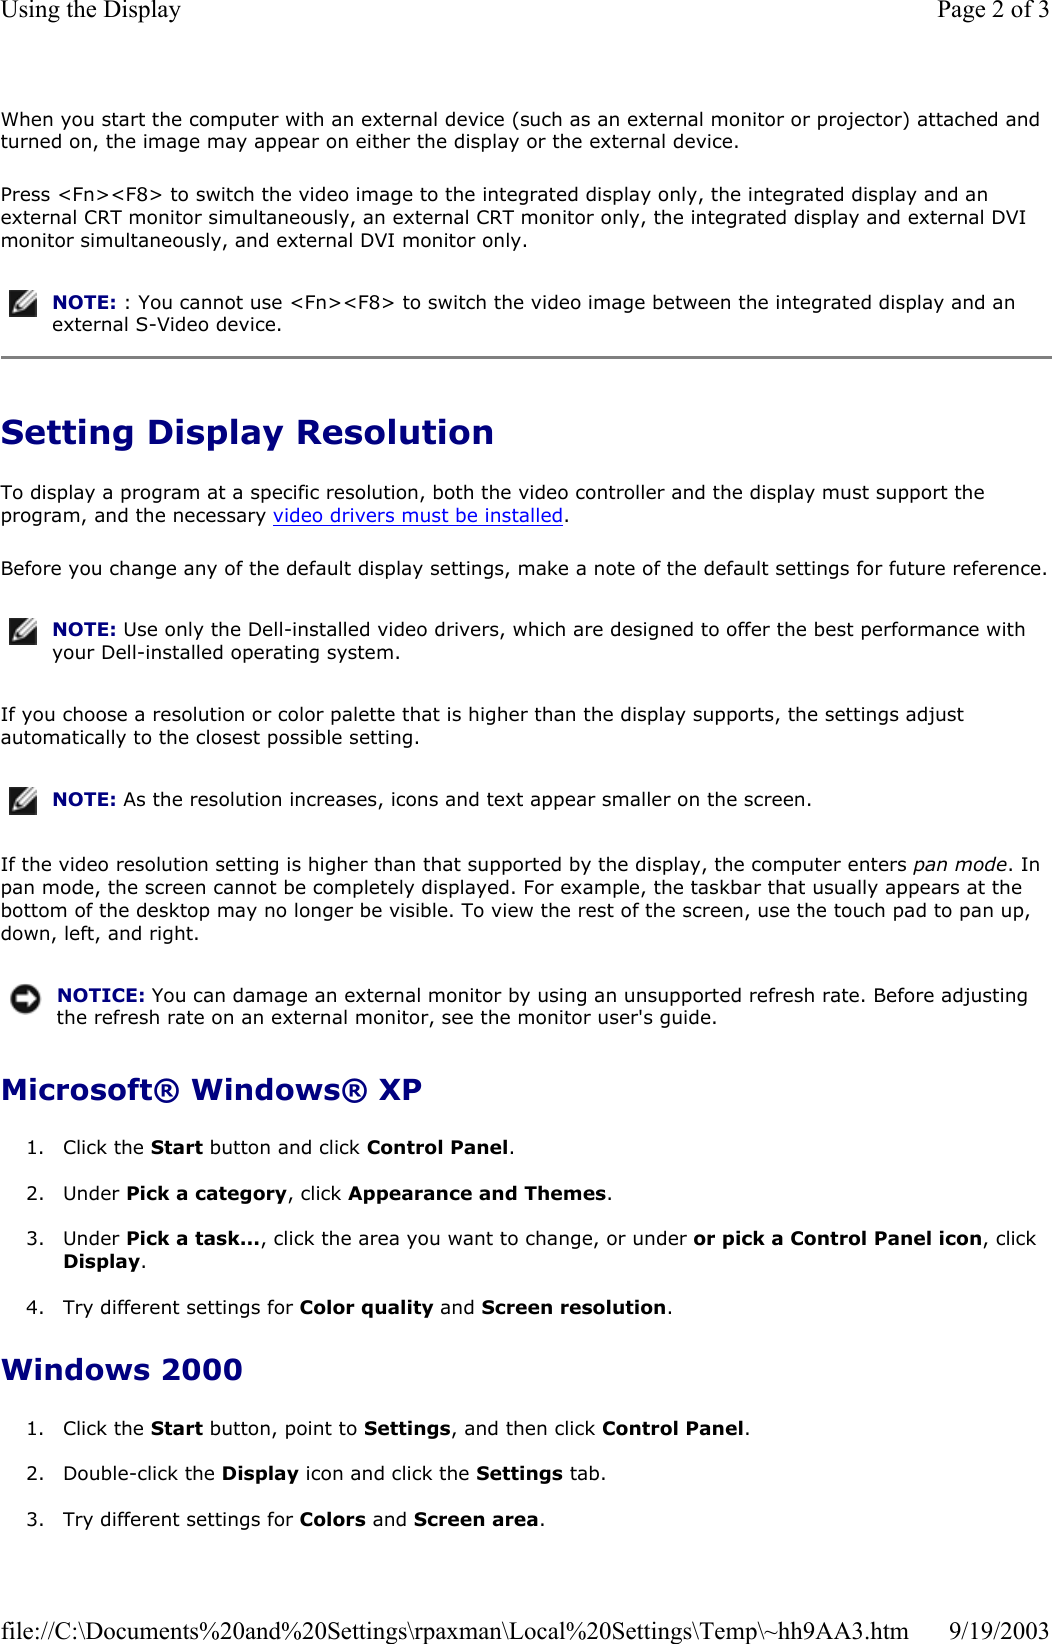 When you start the computer with an external device (such as an external monitor or projector) attached and turned on, the image may appear on either the display or the external device. Press &lt;Fn&gt;&lt;F8&gt; to switch the video image to the integrated display only, the integrated display and an external CRT monitor simultaneously, an external CRT monitor only, the integrated display and external DVI monitor simultaneously, and external DVI monitor only. Setting Display Resolution To display a program at a specific resolution, both the video controller and the display must support the program, and the necessary video drivers must be installed. Before you change any of the default display settings, make a note of the default settings for future reference.If you choose a resolution or color palette that is higher than the display supports, the settings adjust automatically to the closest possible setting. If the video resolution setting is higher than that supported by the display, the computer enters pan mode. In pan mode, the screen cannot be completely displayed. For example, the taskbar that usually appears at the bottom of the desktop may no longer be visible. To view the rest of the screen, use the touch pad to pan up, down, left, and right. Microsoft® Windows® XP 1. Click the Start button and click Control Panel.  2. Under Pick a category, click Appearance and Themes.  3. Under Pick a task..., click the area you want to change, or under or pick a Control Panel icon, click Display.  4. Try different settings for Color quality and Screen resolution.   Windows 2000 1. Click the Start button, point to Settings, and then click Control Panel.  2. Double-click the Display icon and click the Settings tab.   3. Try different settings for Colors and Screen area. NOTE: : You cannot use &lt;Fn&gt;&lt;F8&gt; to switch the video image between the integrated display and an external S-Video device.NOTE: Use only the Dell-installed video drivers, which are designed to offer the best performance with your Dell-installed operating system.NOTE: As the resolution increases, icons and text appear smaller on the screen.NOTICE: You can damage an external monitor by using an unsupported refresh rate. Before adjusting the refresh rate on an external monitor, see the monitor user&apos;s guide.Page 2 of 3Using the Display9/19/2003file://C:\Documents%20and%20Settings\rpaxman\Local%20Settings\Temp\~hh9AA3.htm